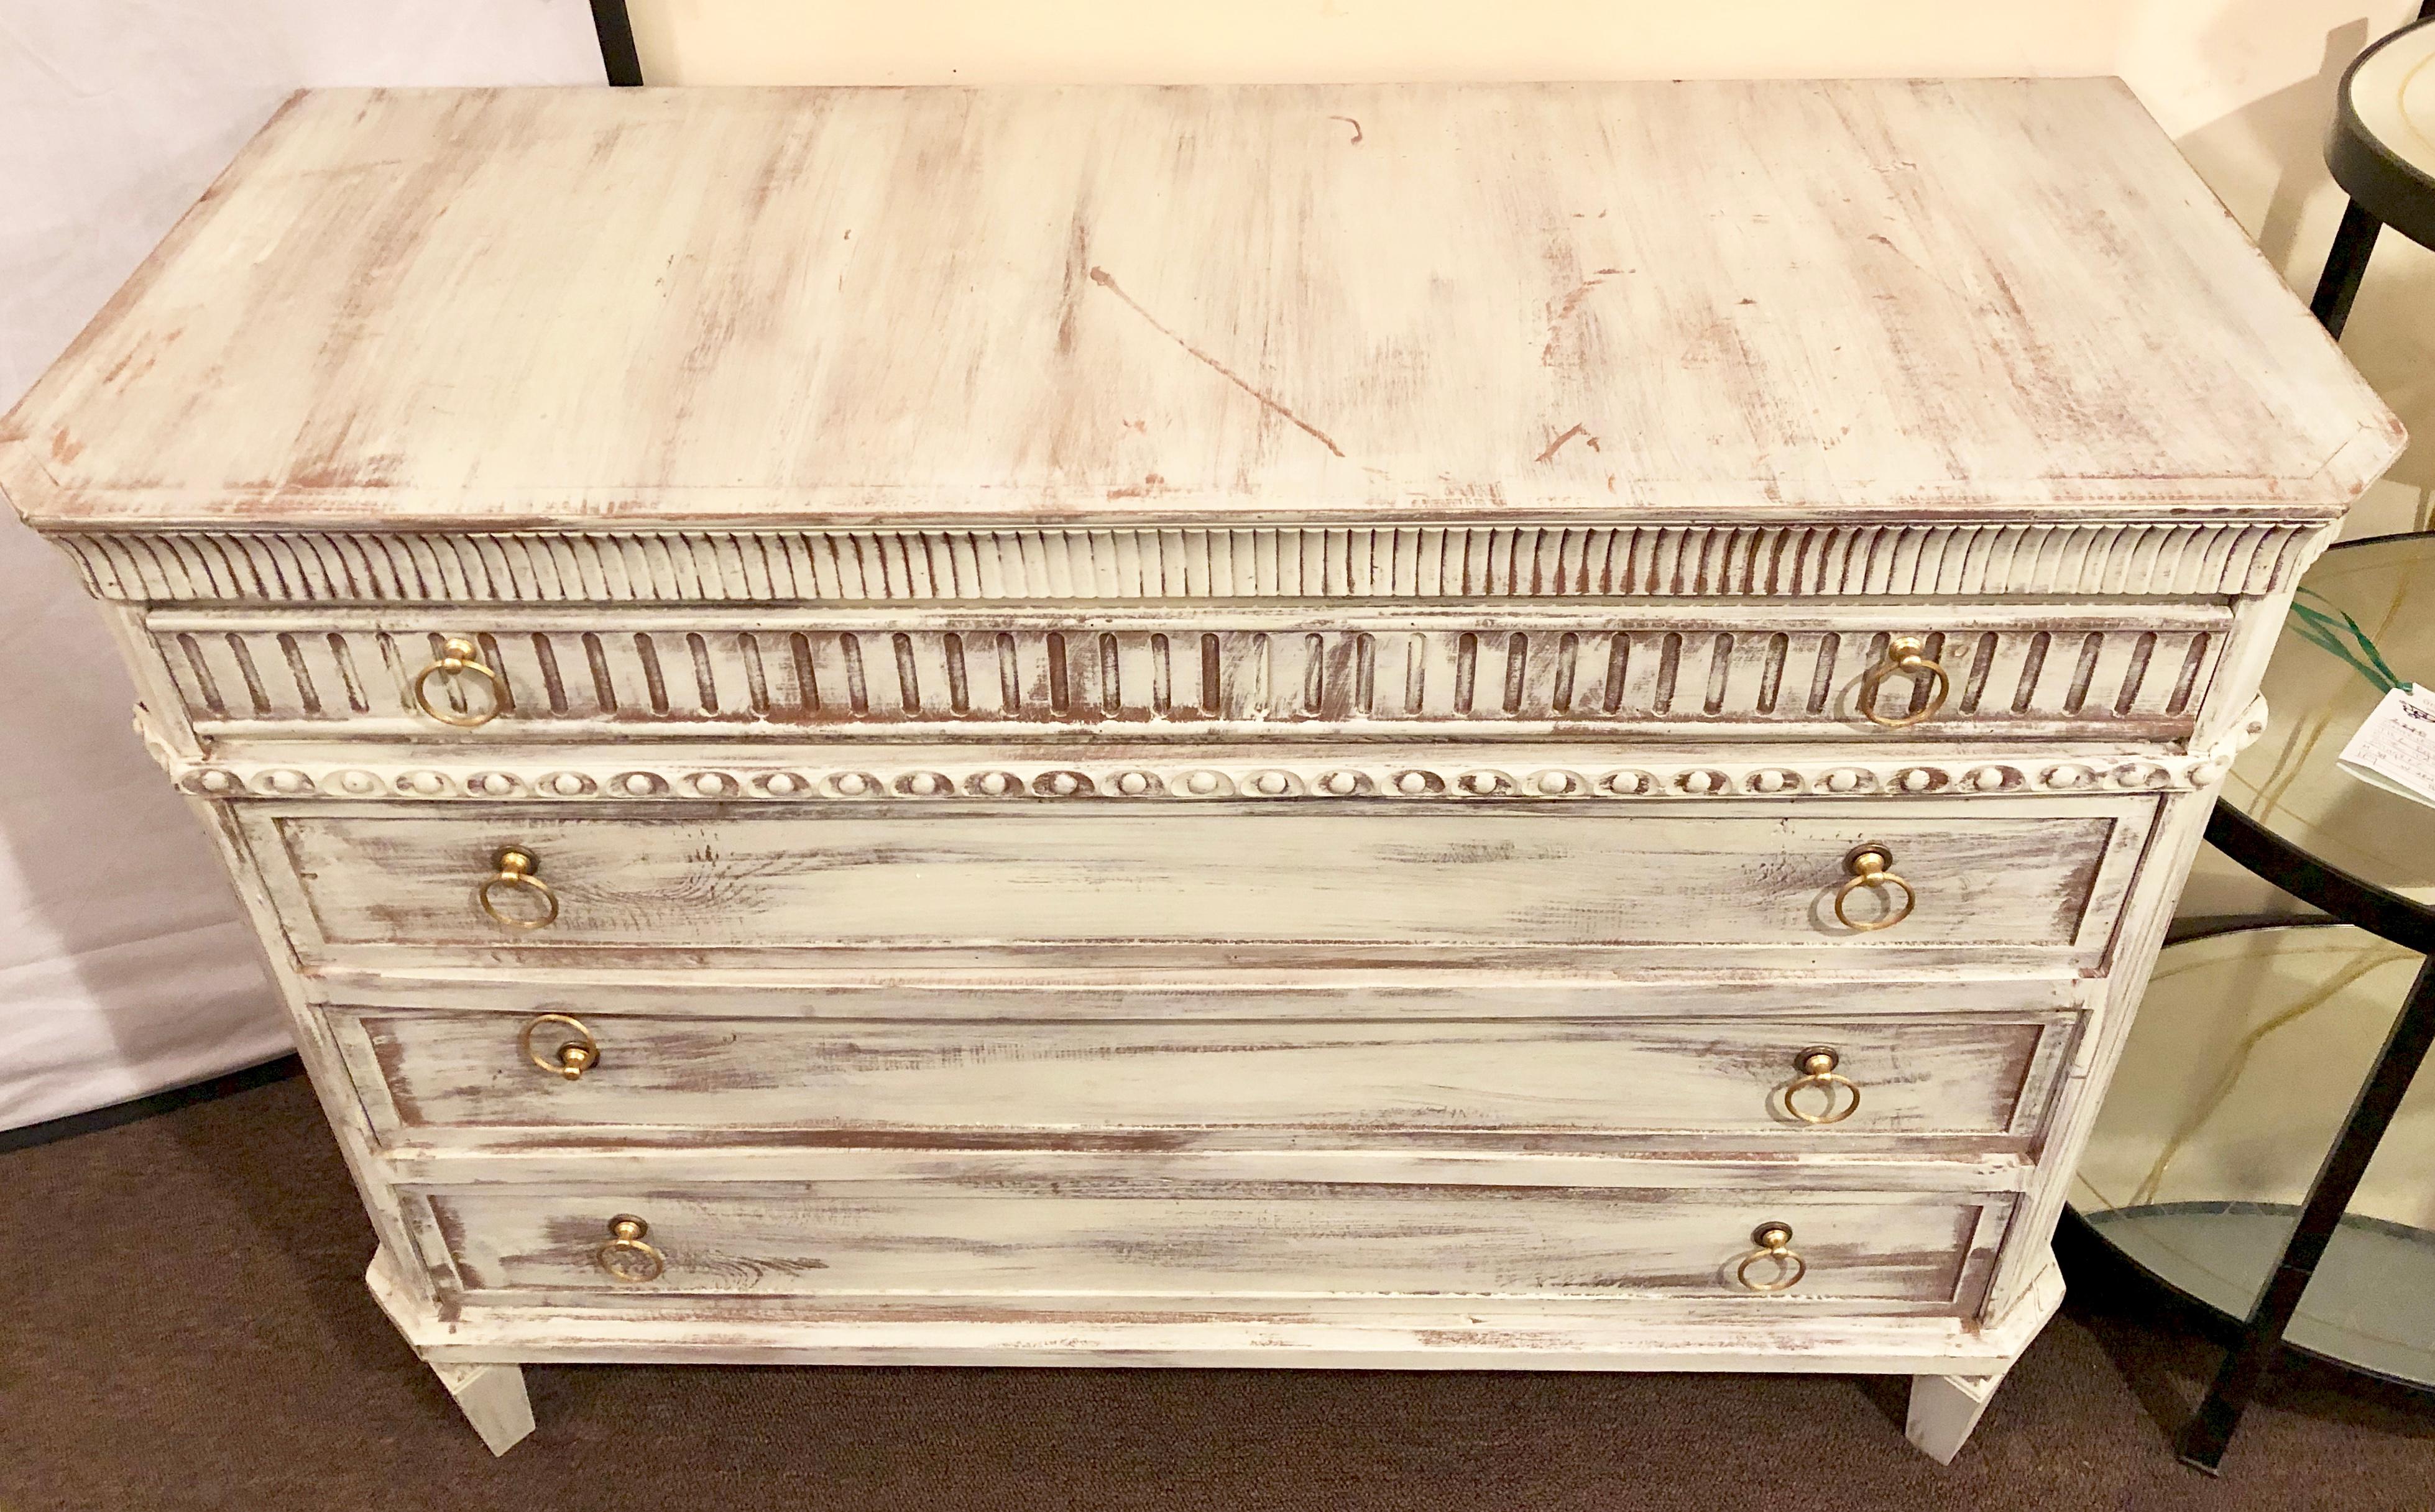 20th Century Swedish Painted Commodes Nightstands Four Drawers Distressed White Finish